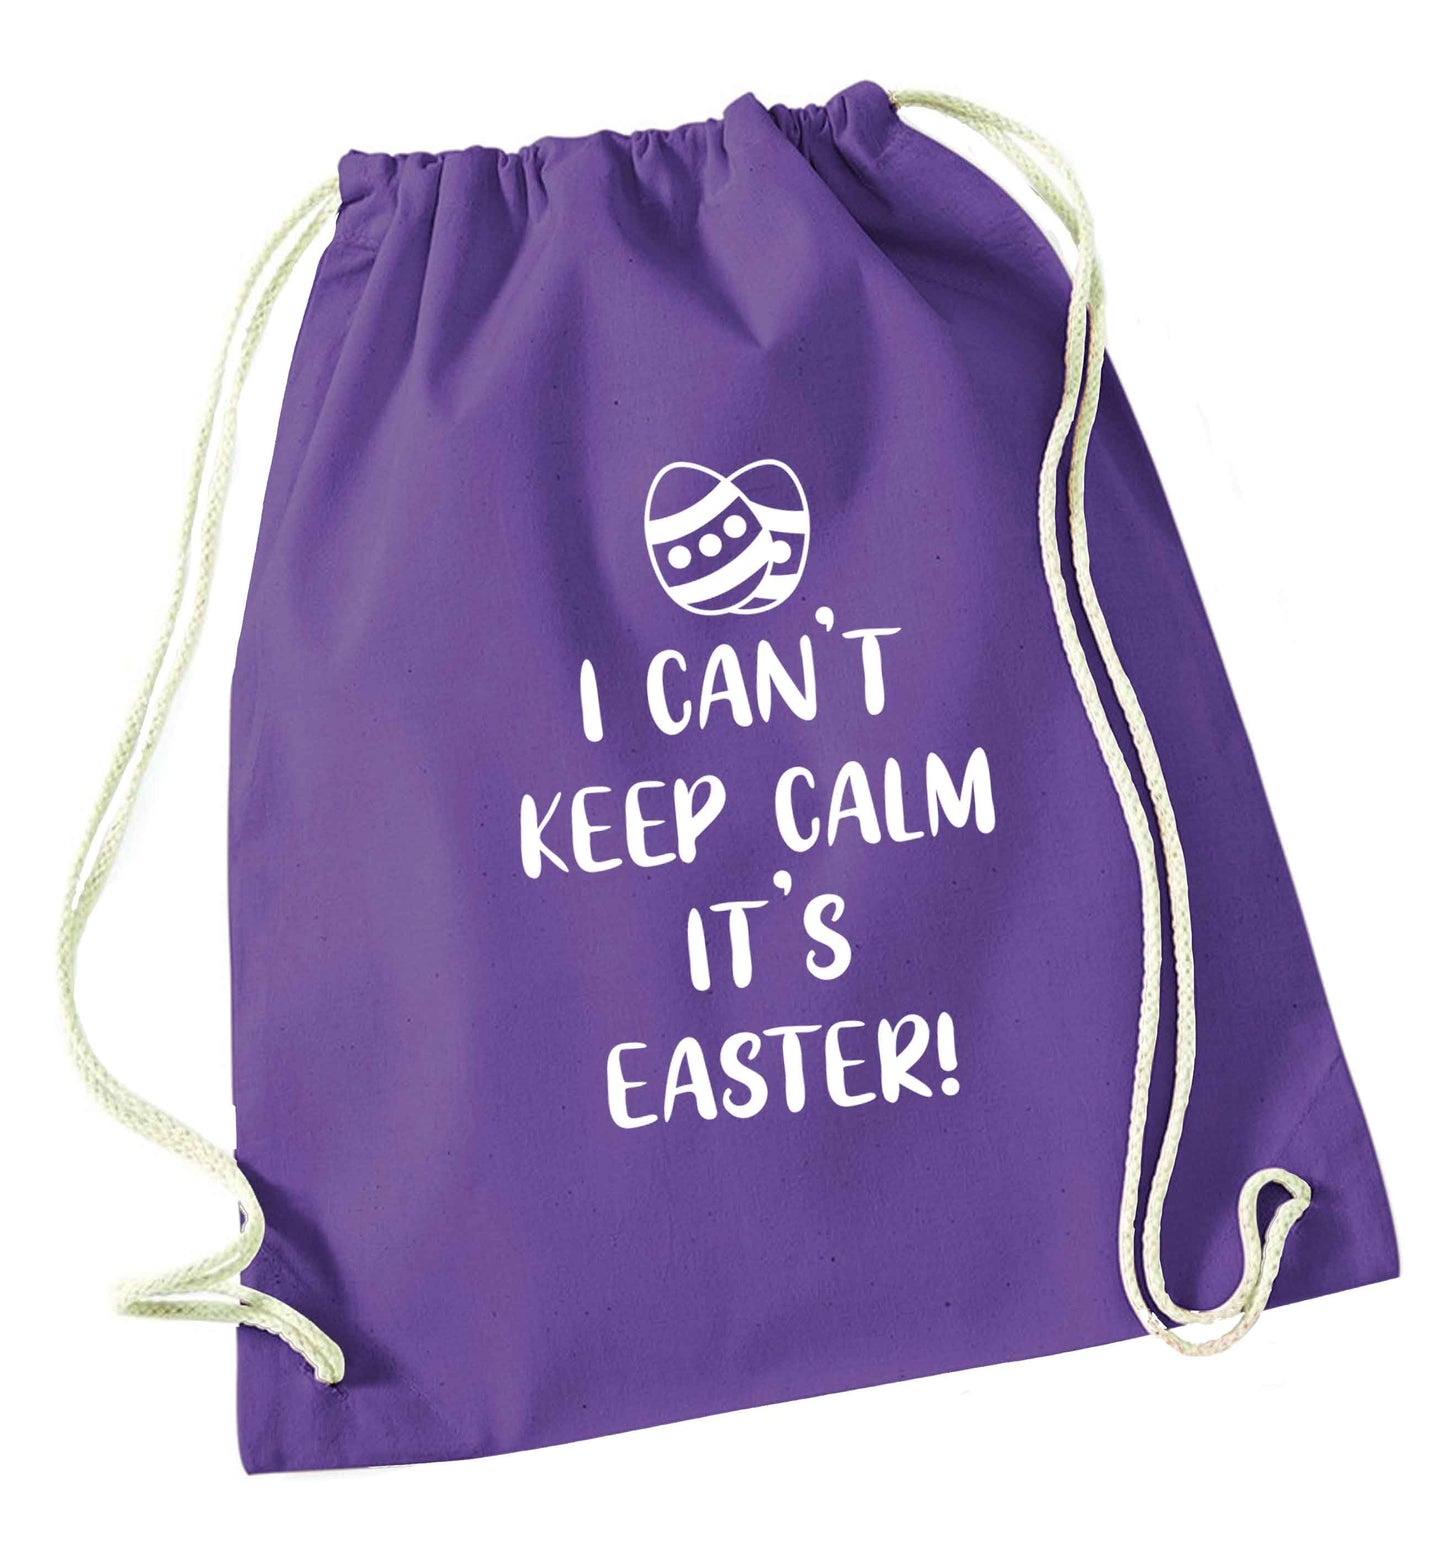 I can't keep calm it's Easter purple drawstring bag